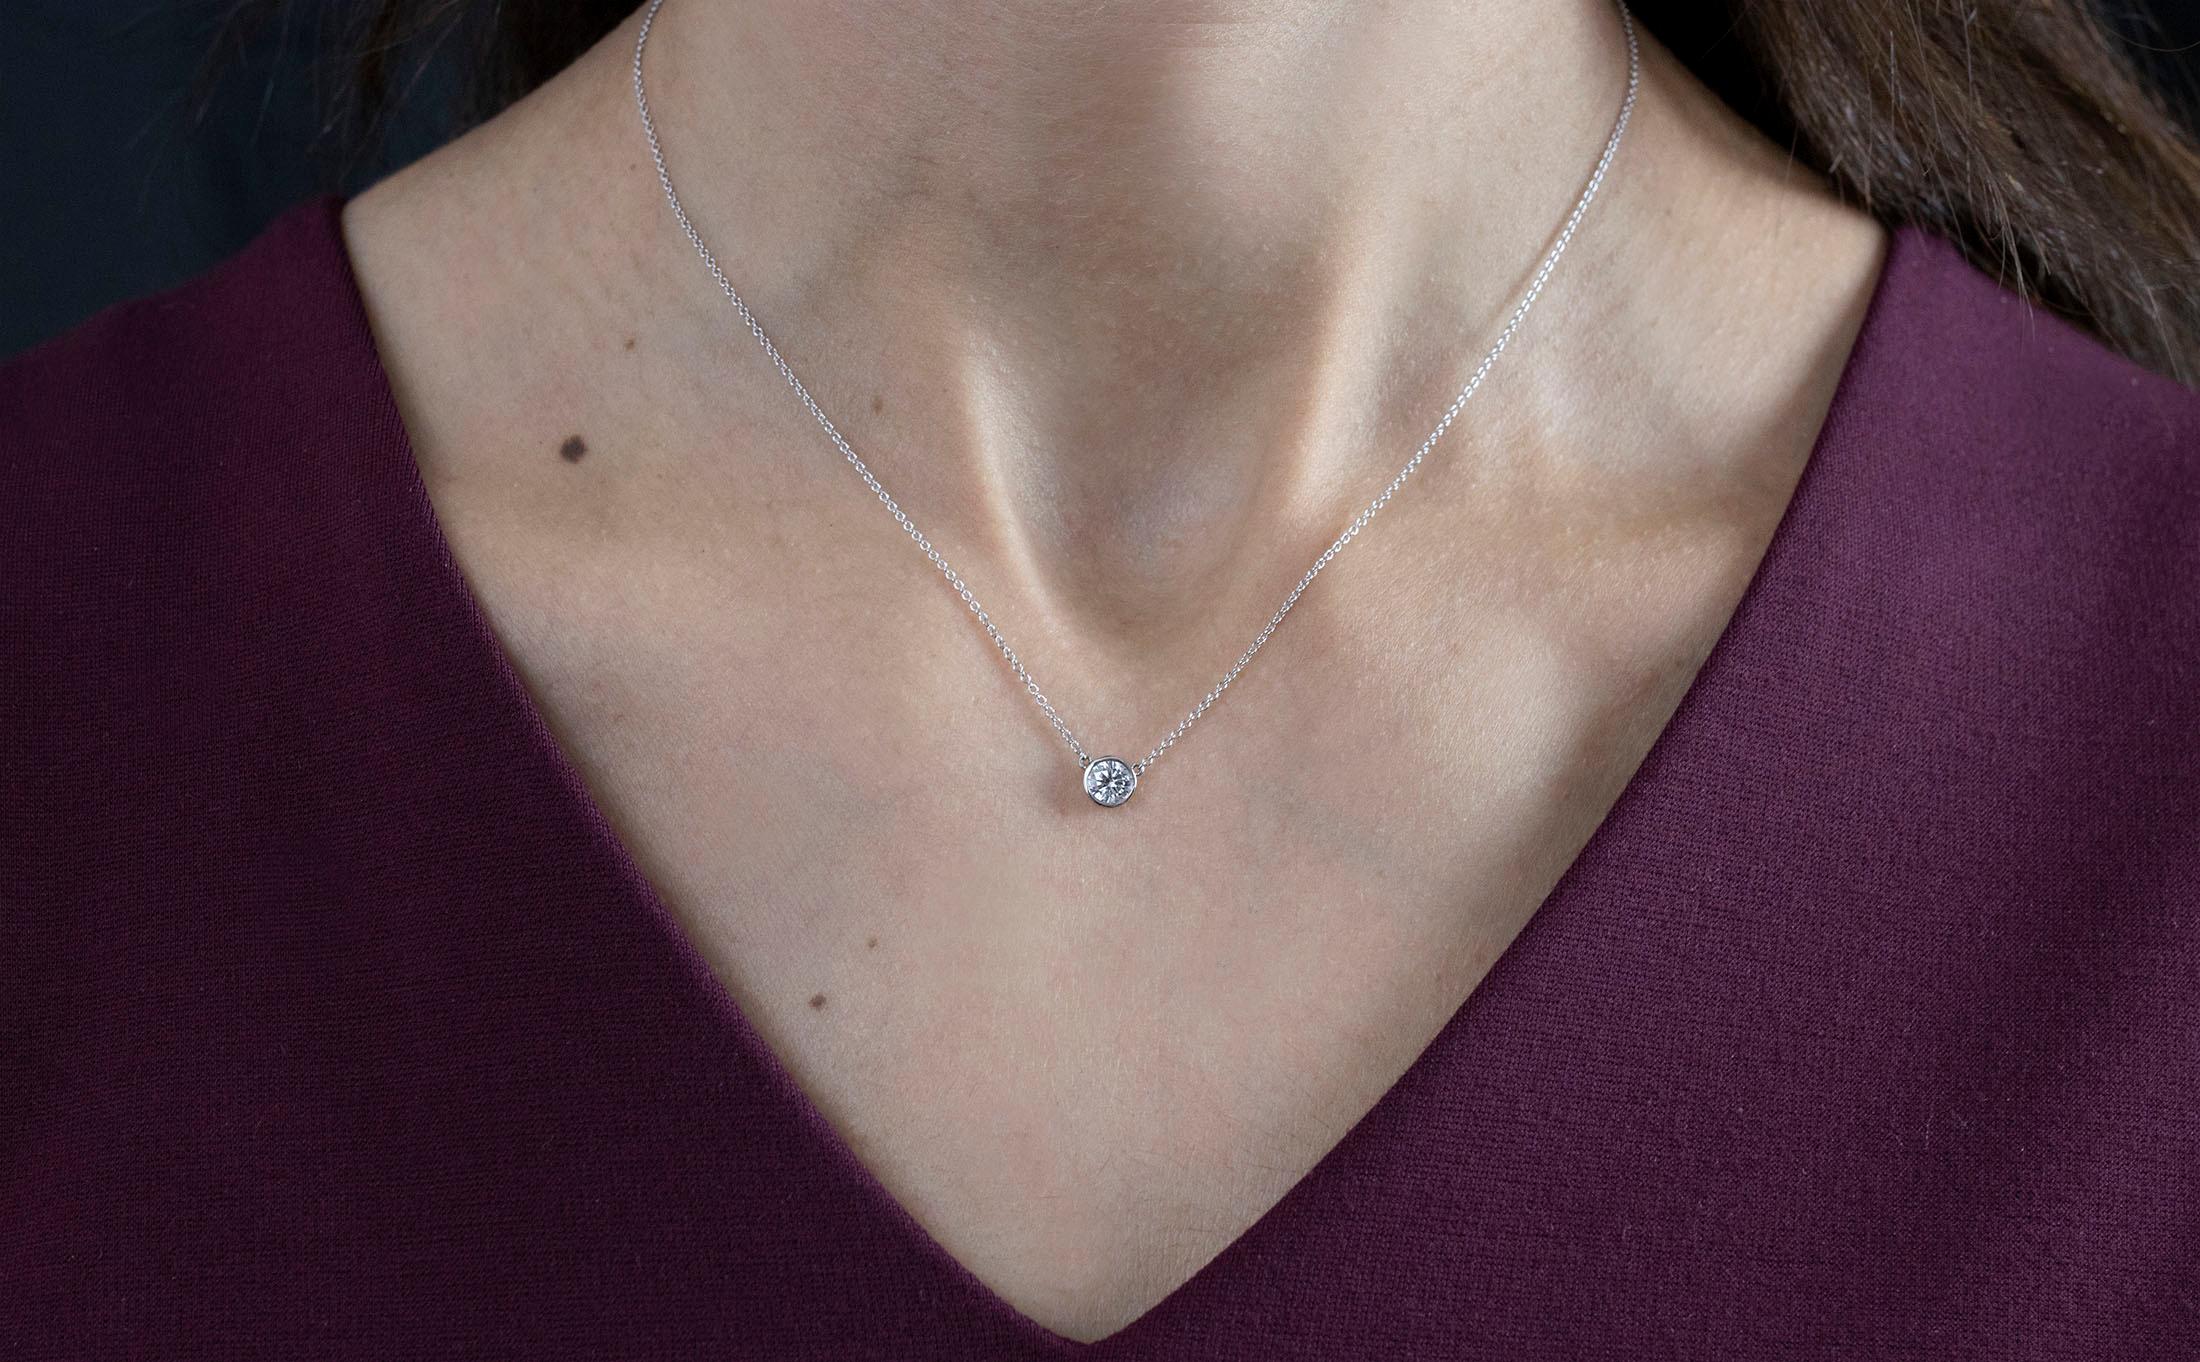 A simple and versatile solitaire pendant necklace showcasing a single 0.42 carat round diamond in a 14K White Gold bezel. Attached to a 16 inch with an interval at 15 inch White Gold chain. 

Style available in different price ranges. Prices are